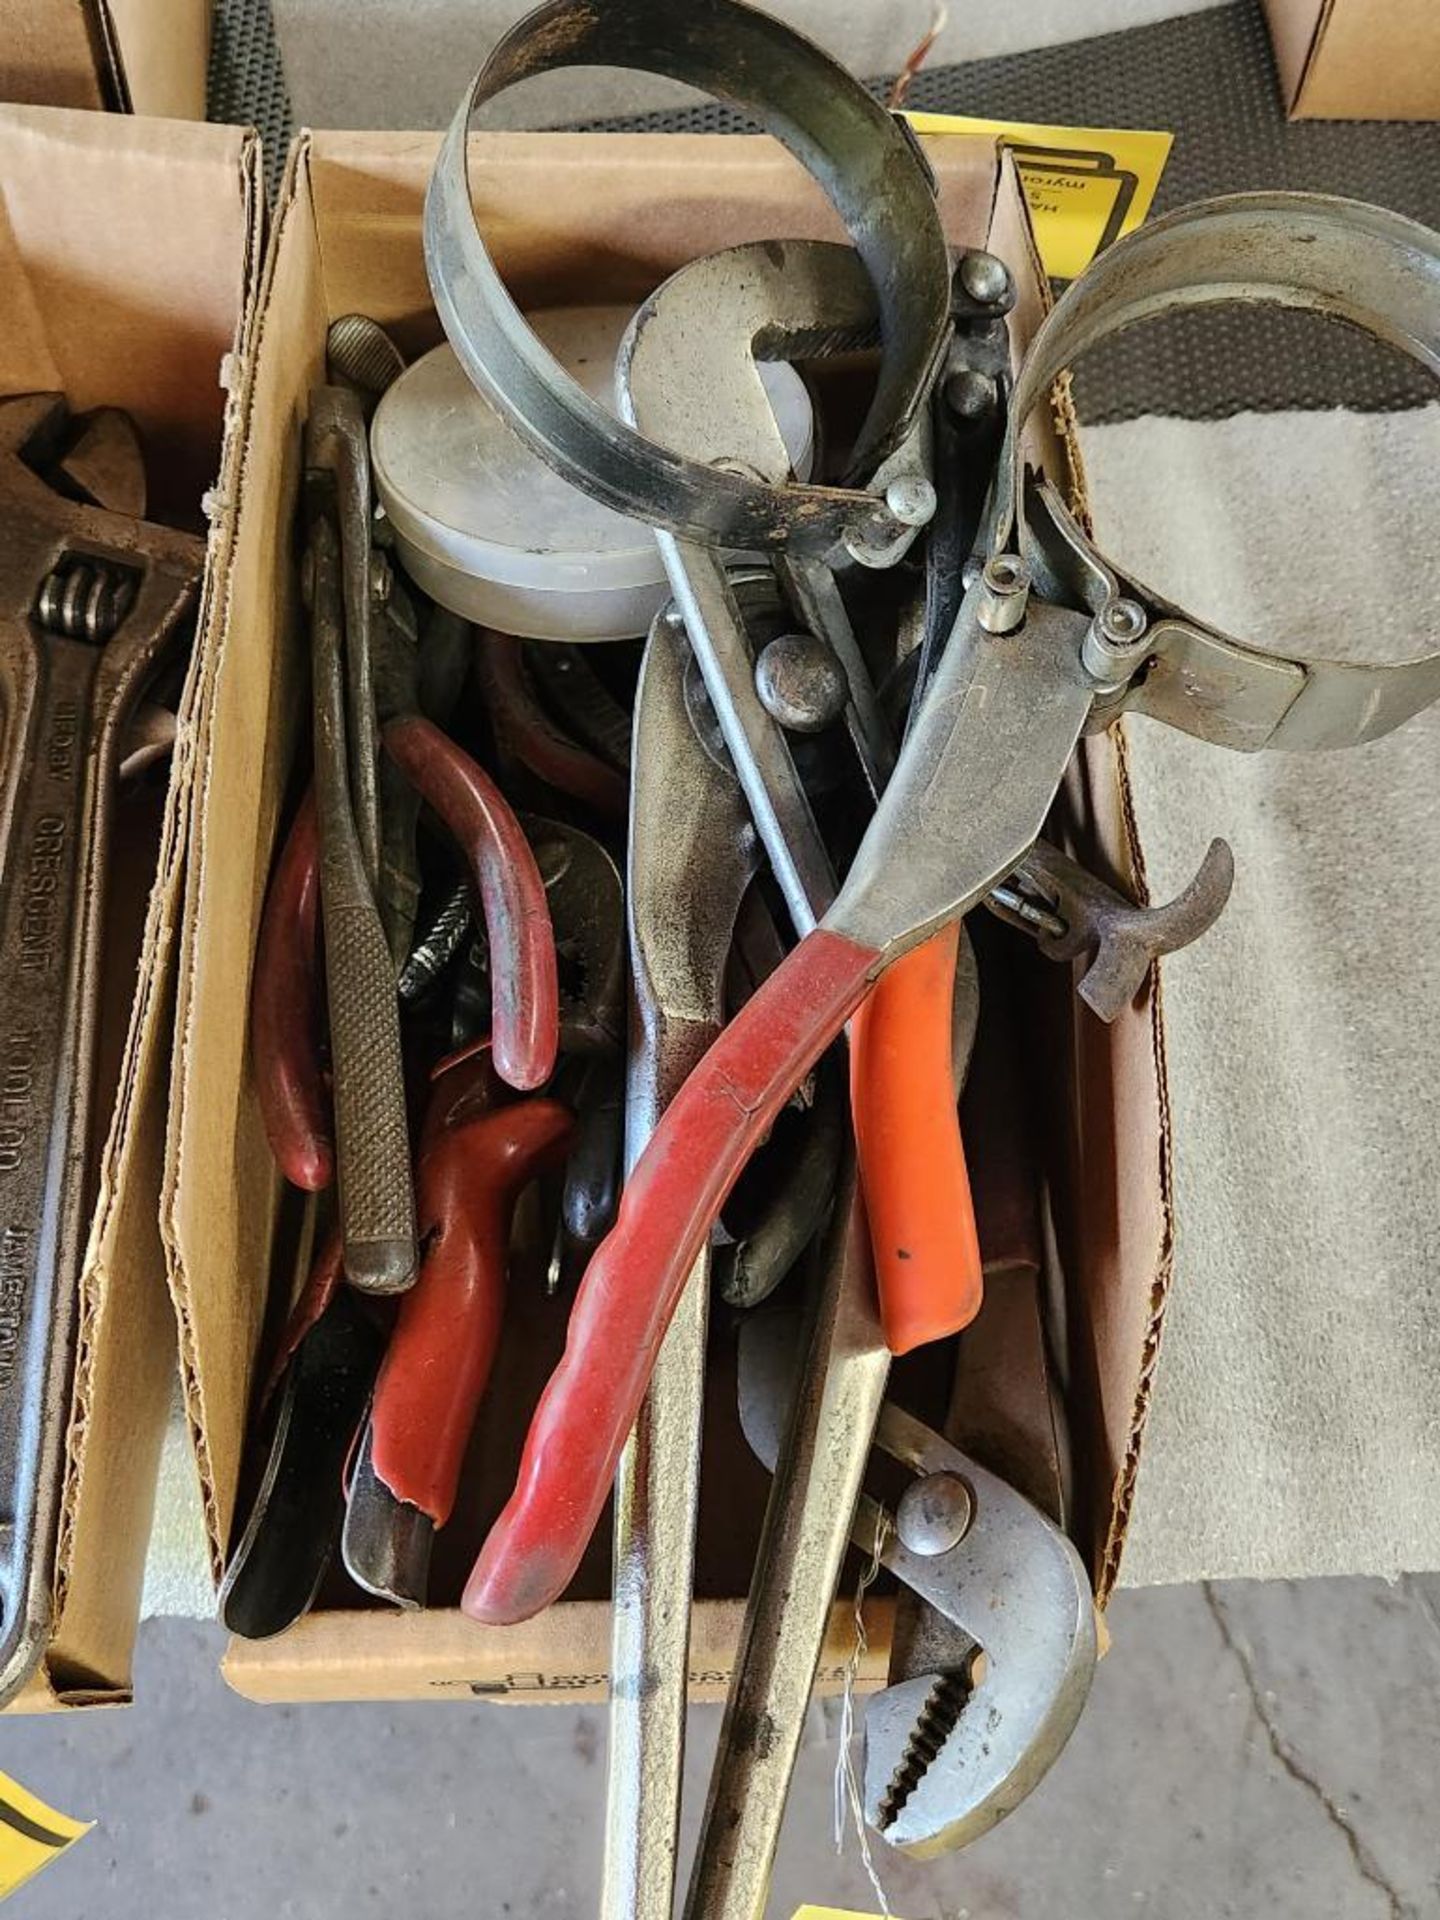 Box of Miscellaneous Flyers, Cut-Off Tools, Oil Filter, Wrenches